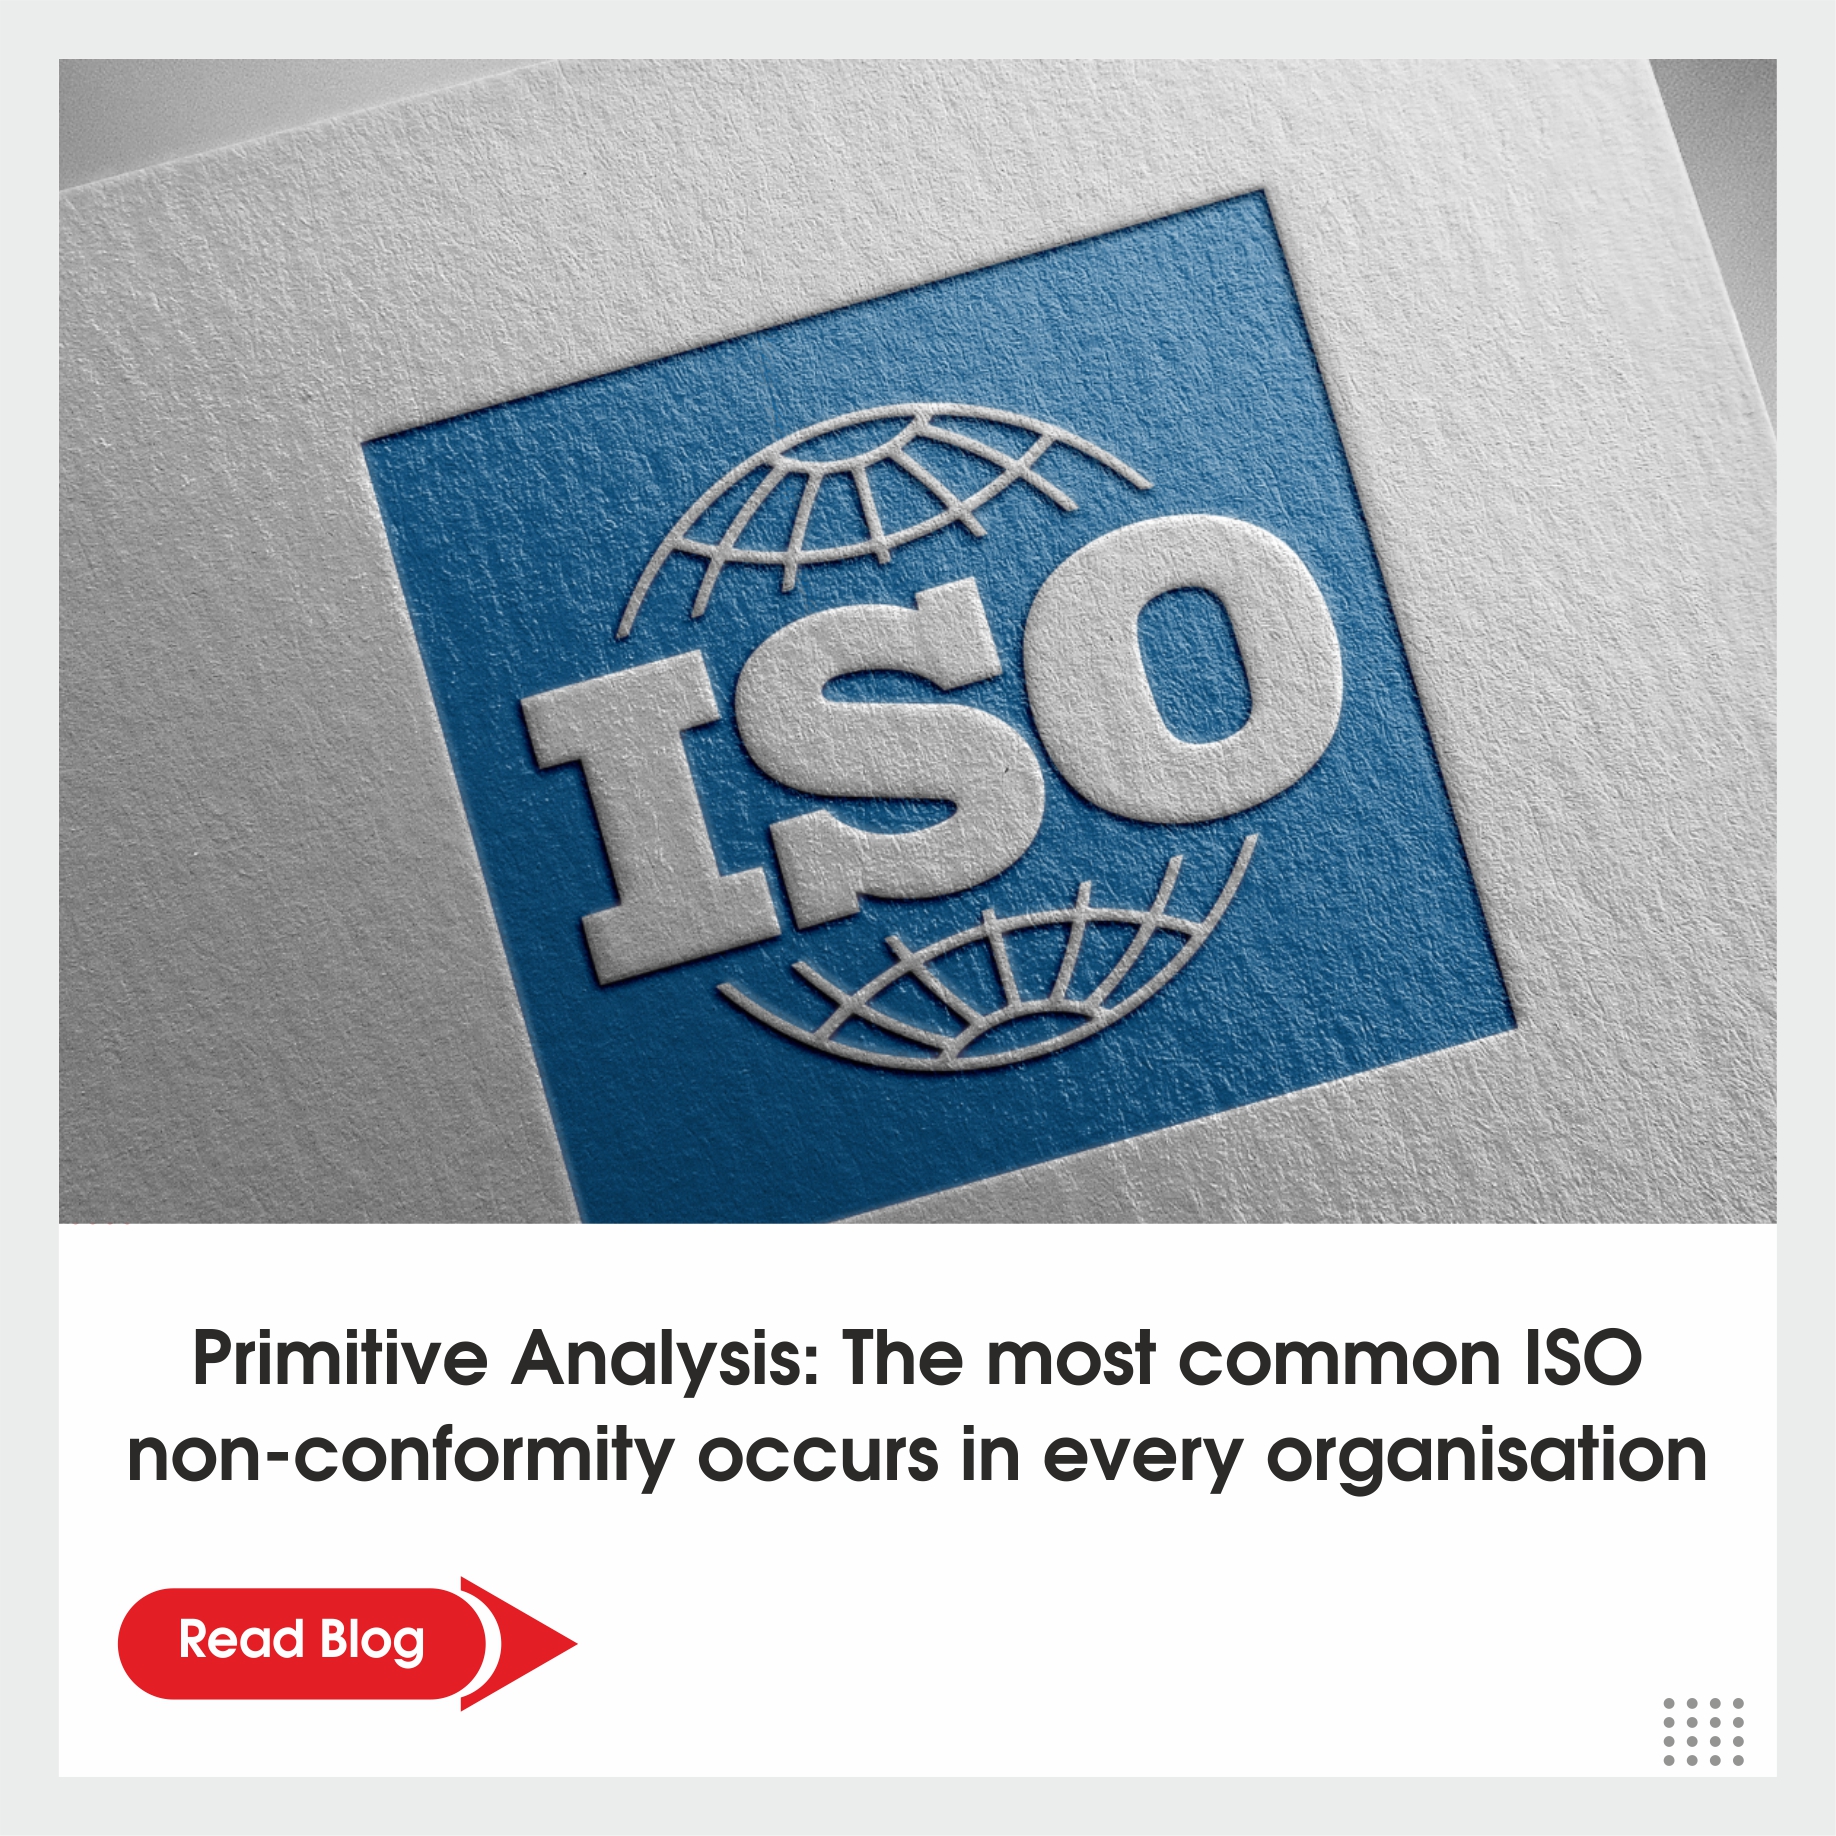 Primitive Analysis: The most common ISO non-conformity occurs in every organisation